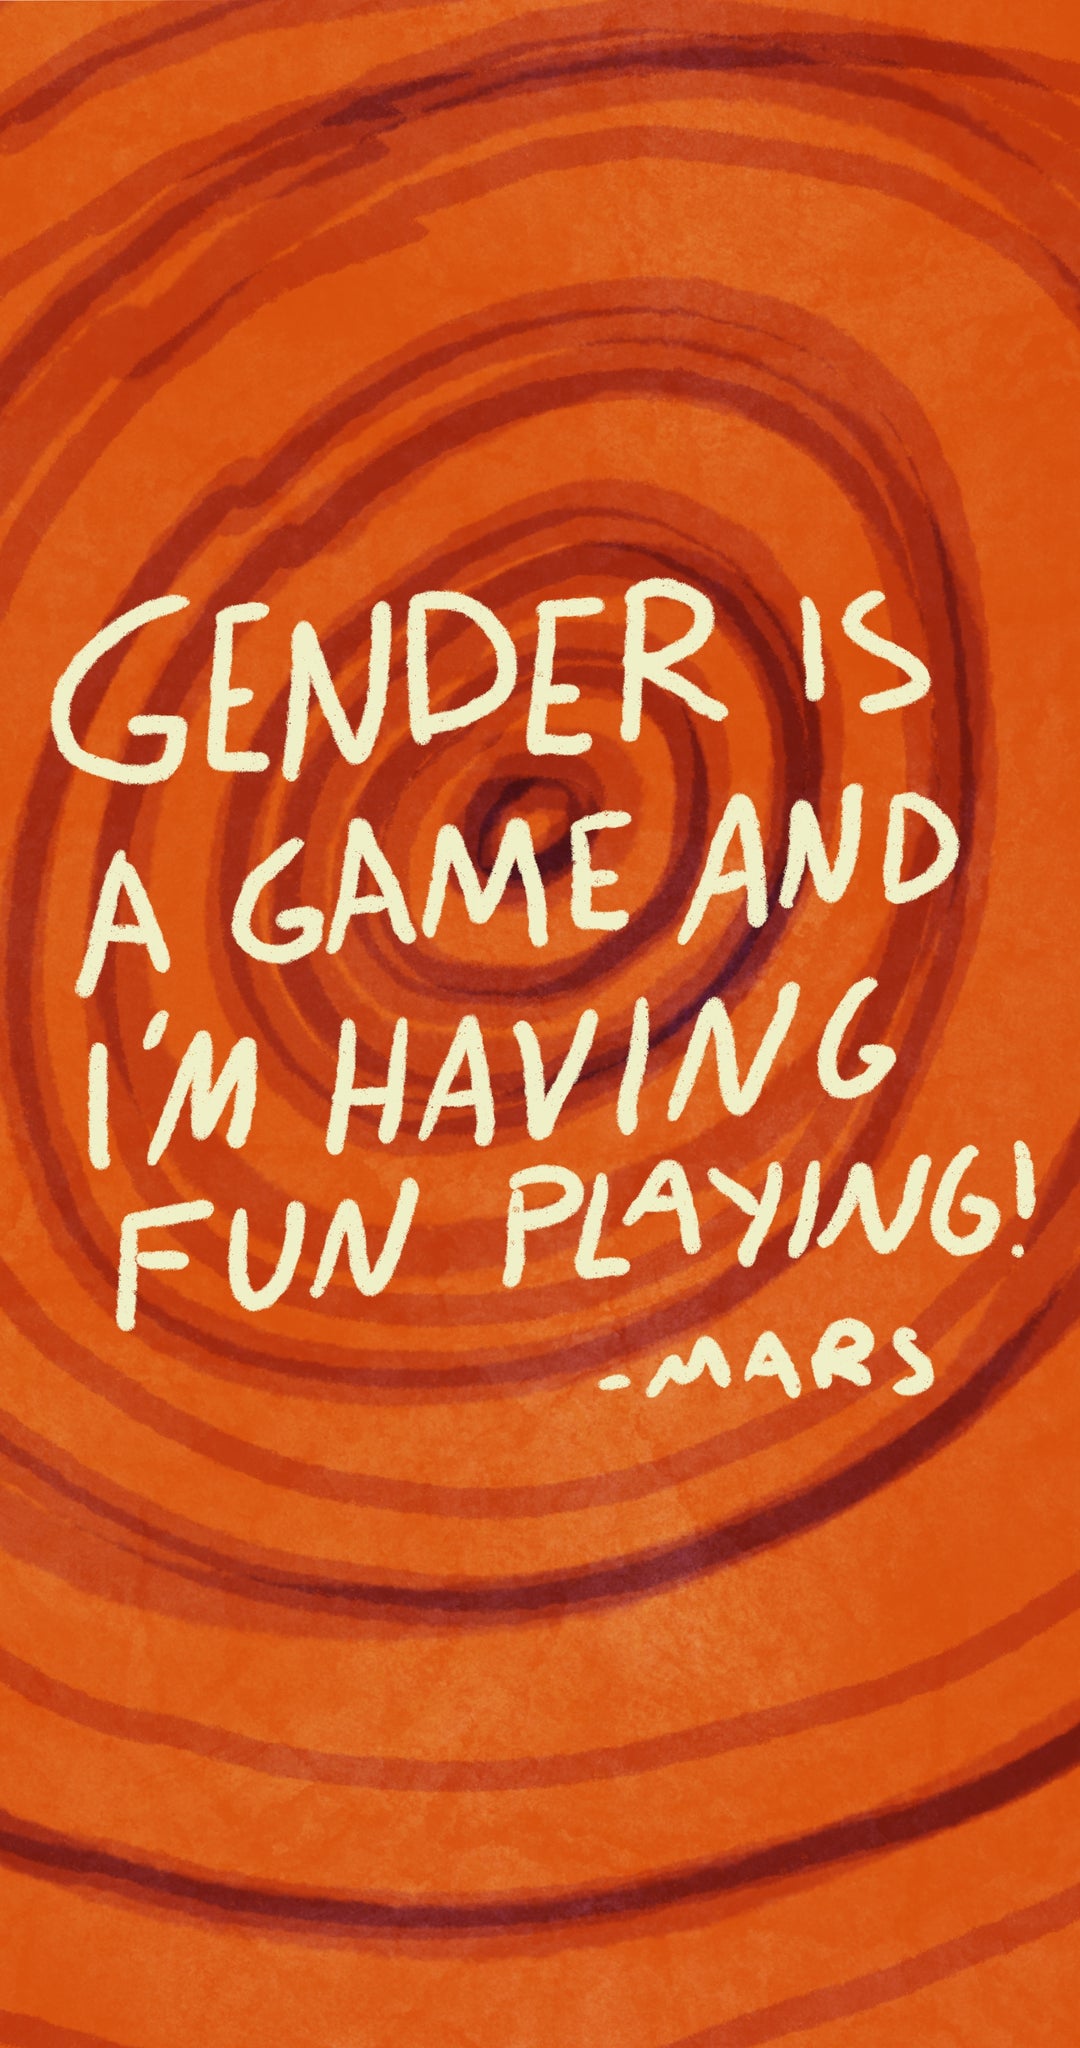 Gender is a Game and i'm having fun playing